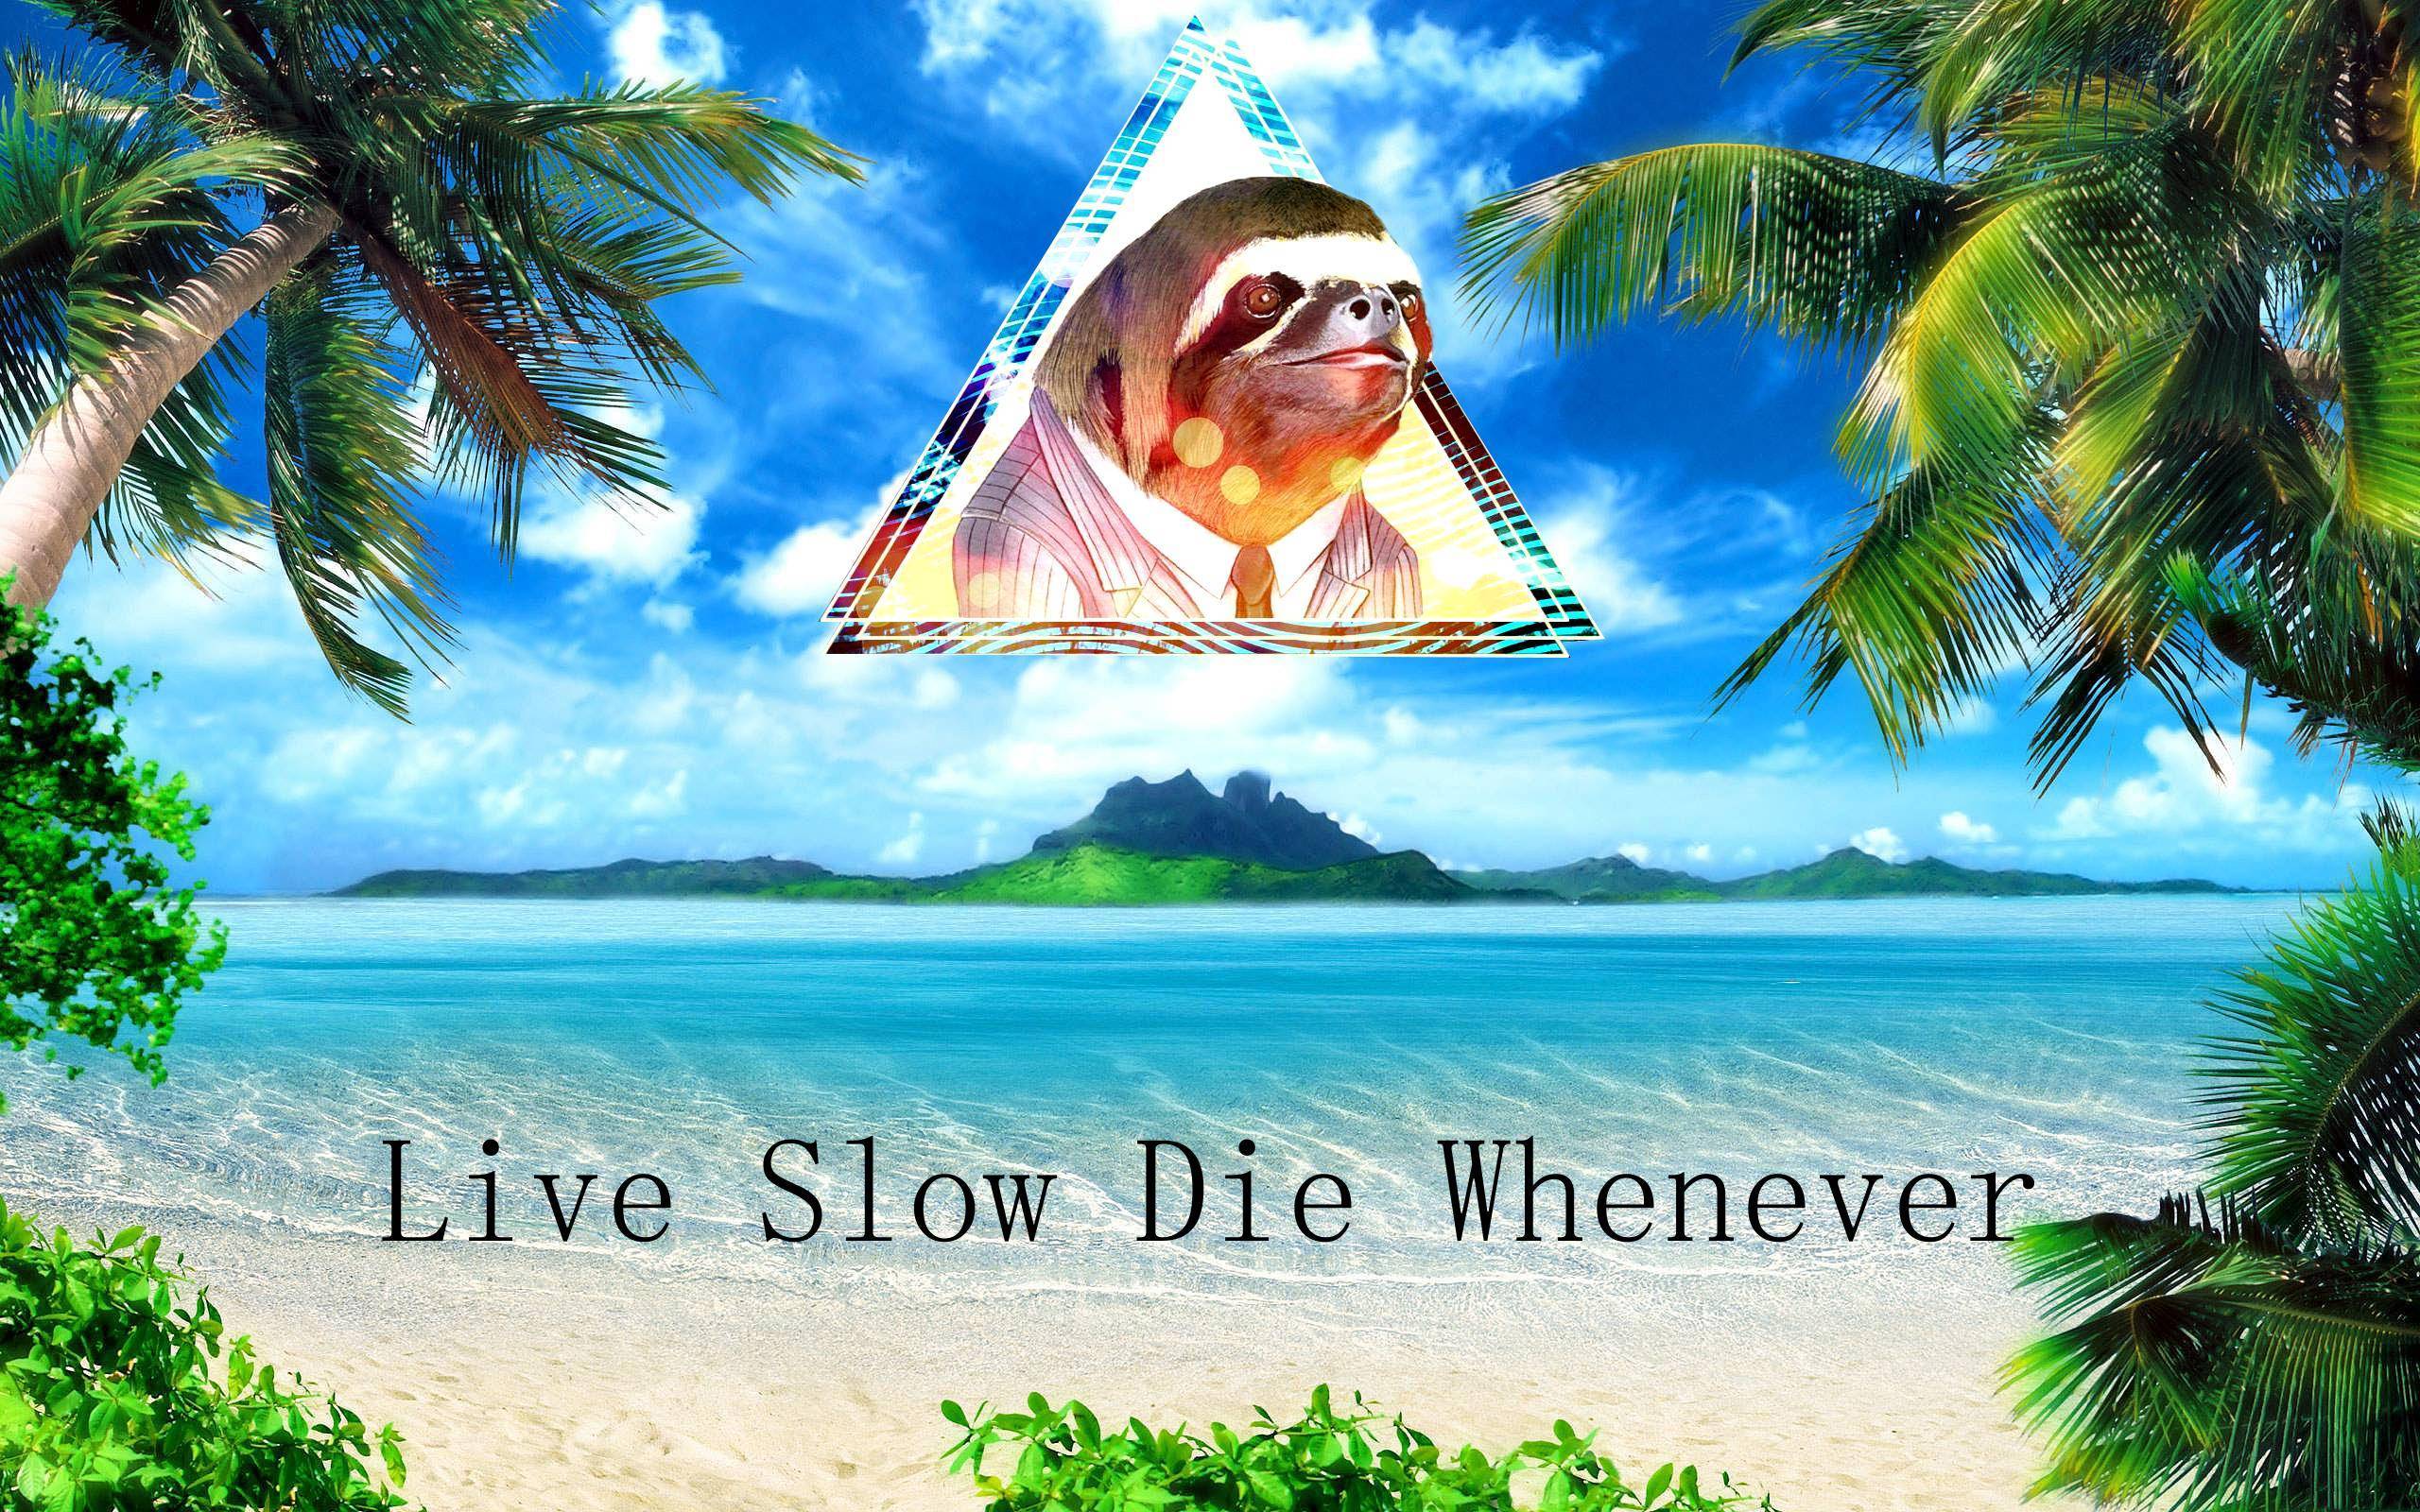 Live Slow, Die Whenever